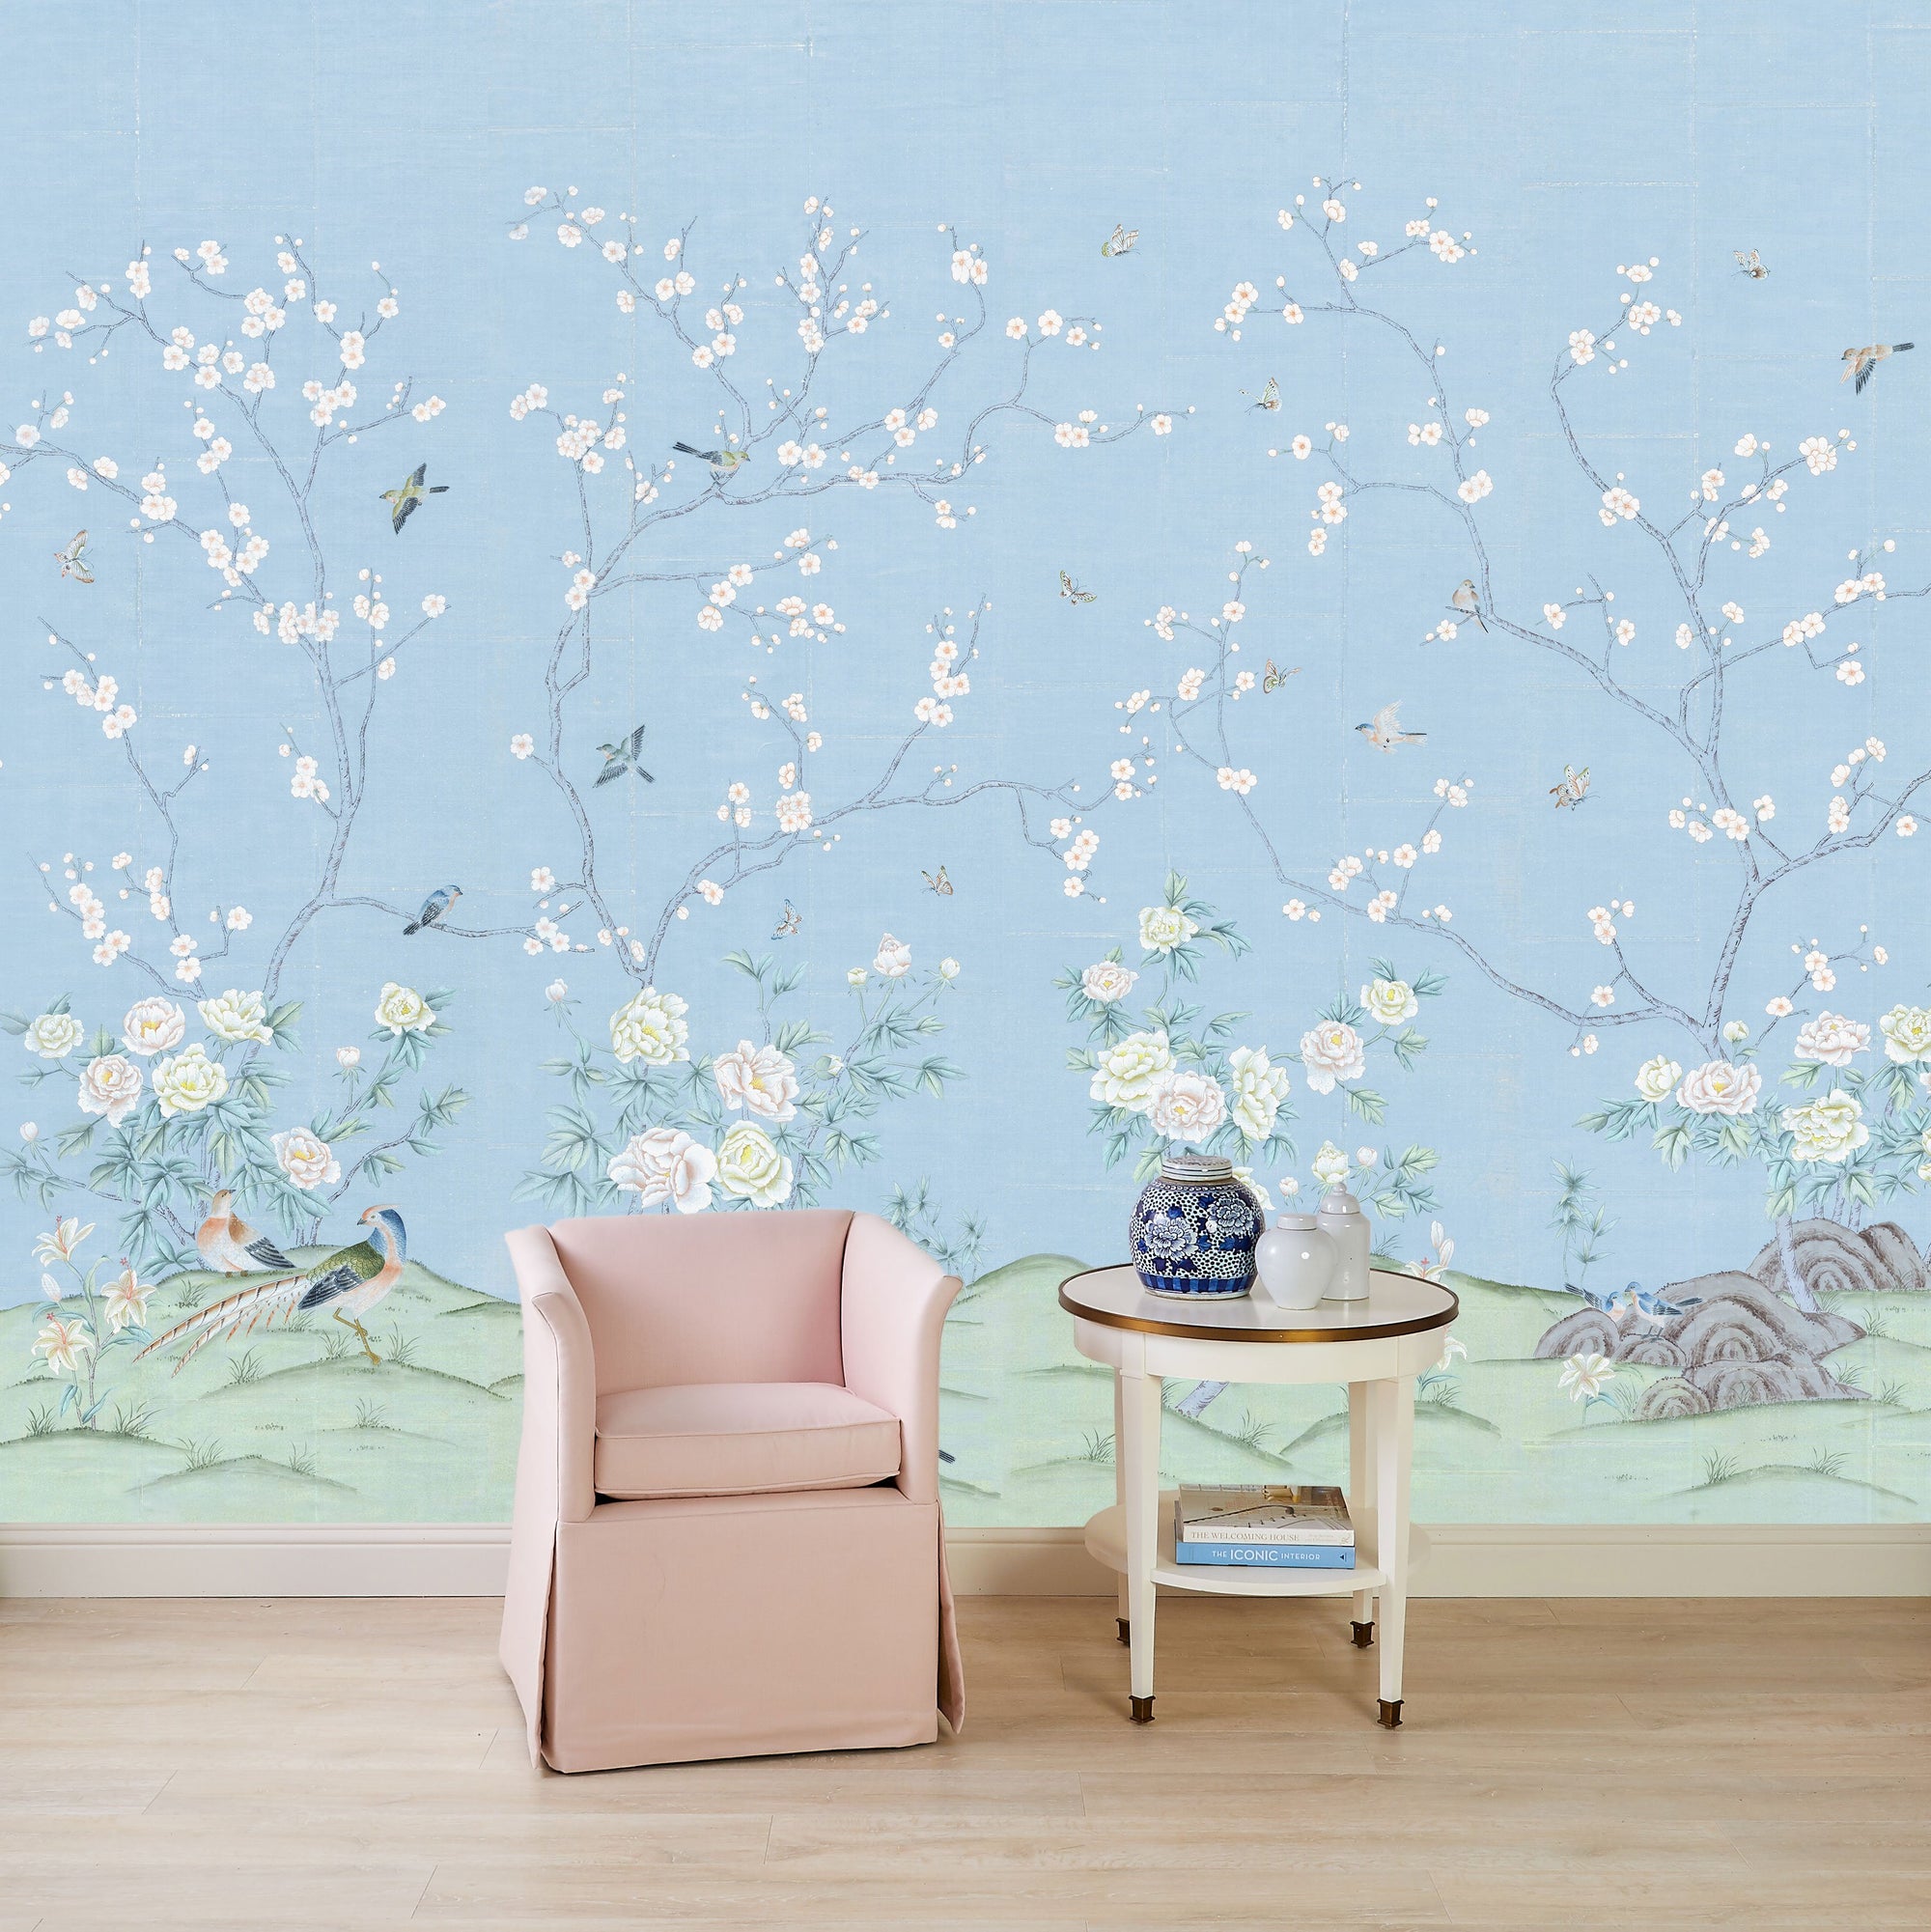 Pierre in Robins Egg Blue Chinoiserie Wallpaper Mural